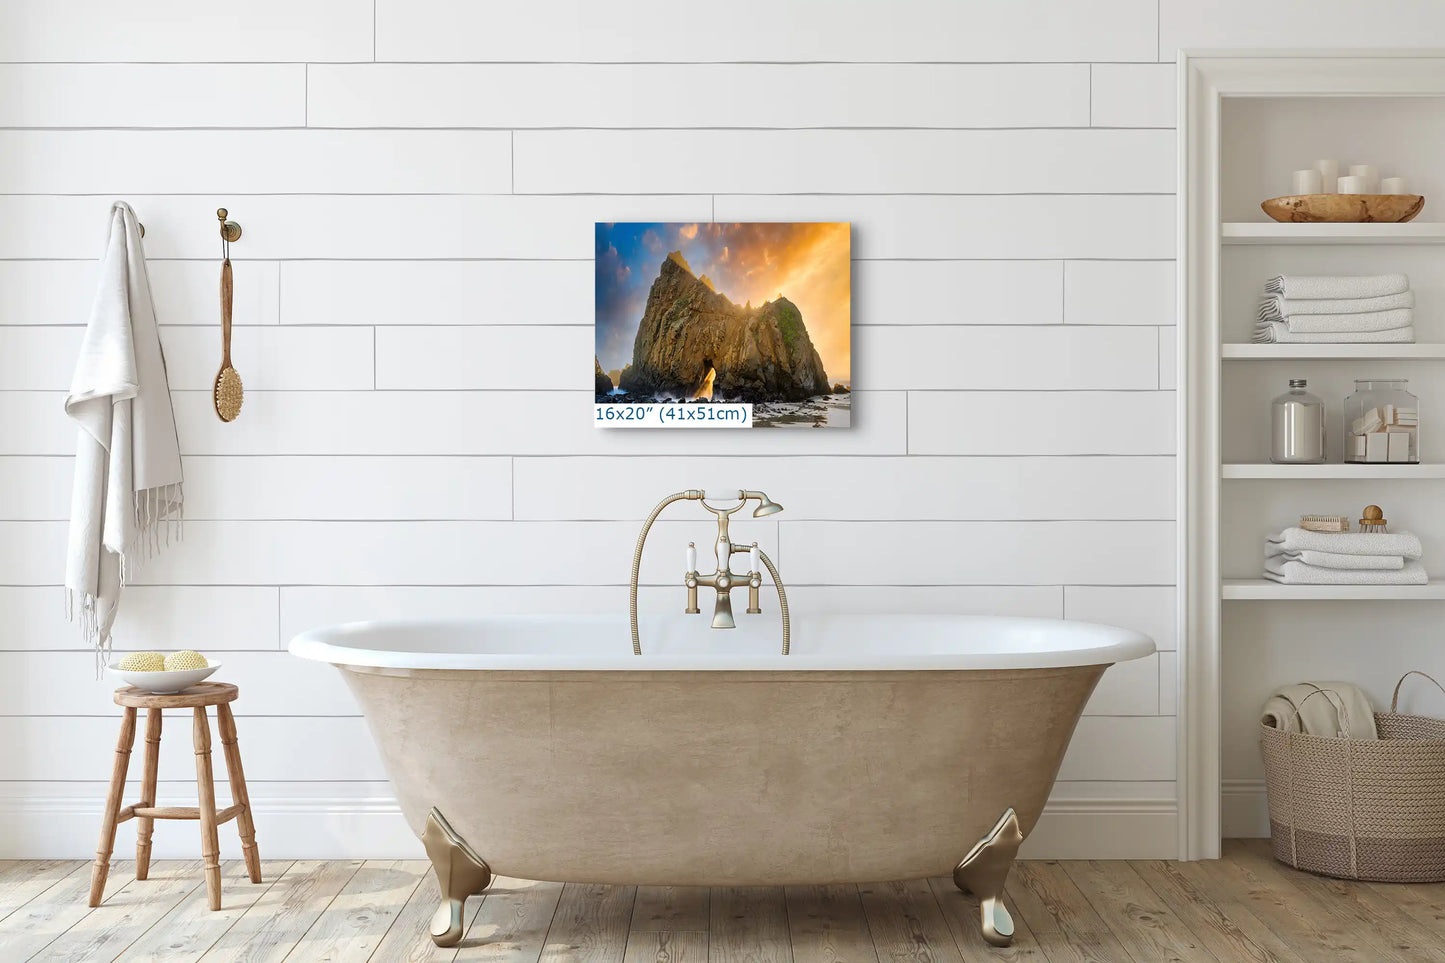 A 16"x20" canvas print above a bathtub, displaying Keyhole Arch in Big Sur with a warm sunset, adding a serene natural element to the bathroom.